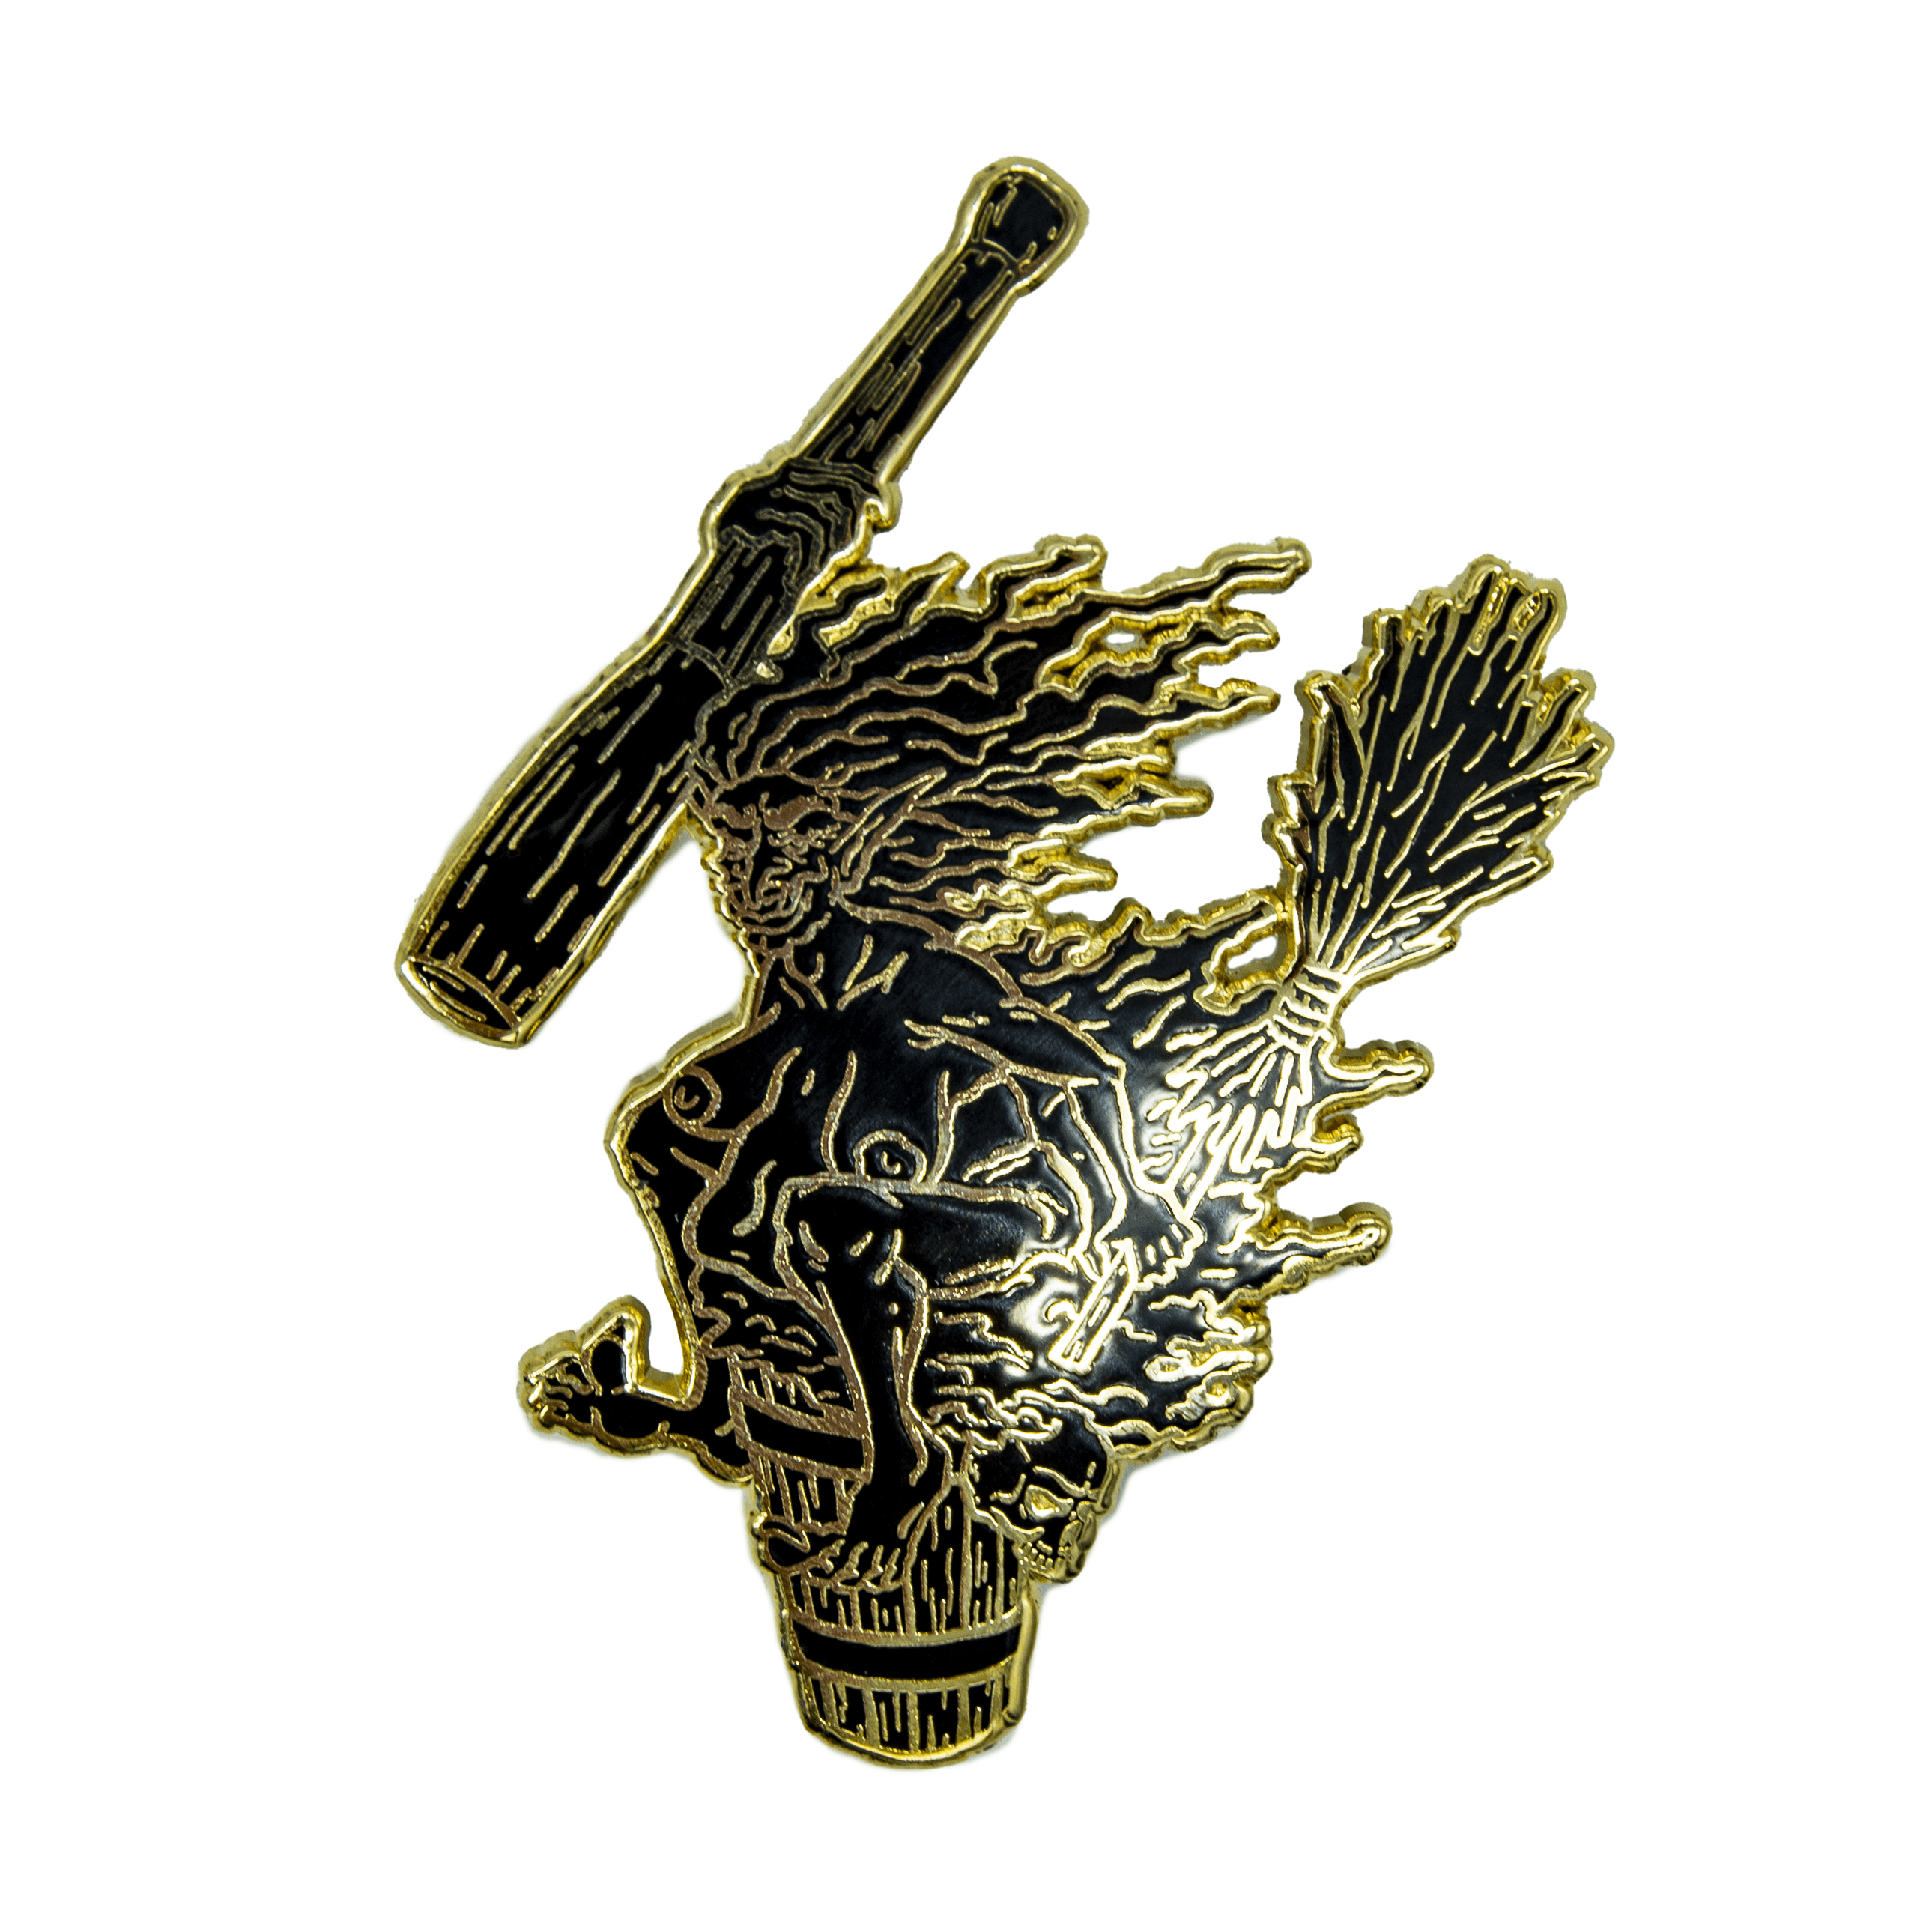 An enamel pin of Baba Yaga the crone witch, riding her mortar and pestle with broom in hand. She has taken off her clothing and sits on it with a wicked smile. The pin has a gold outline and all black fill.